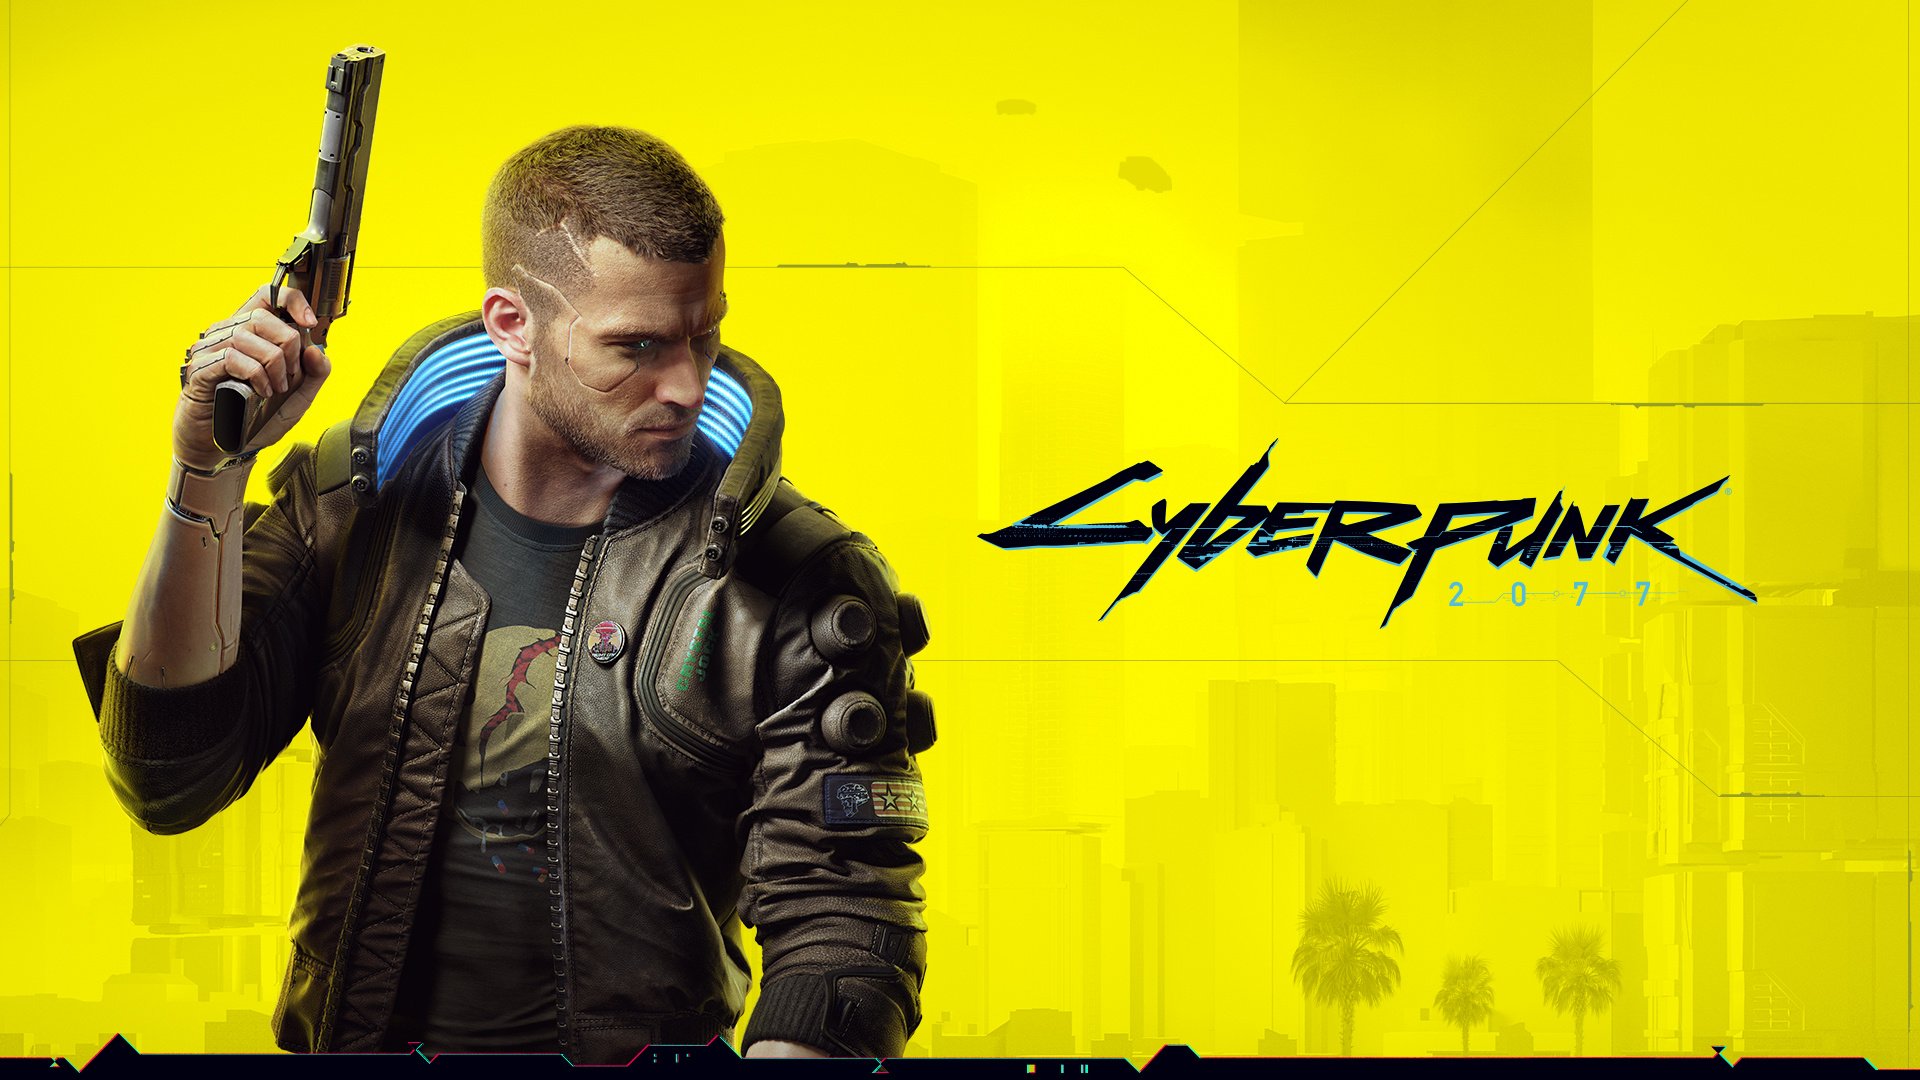  Cyberpunk 2077 – My Thoughts and First Impressions